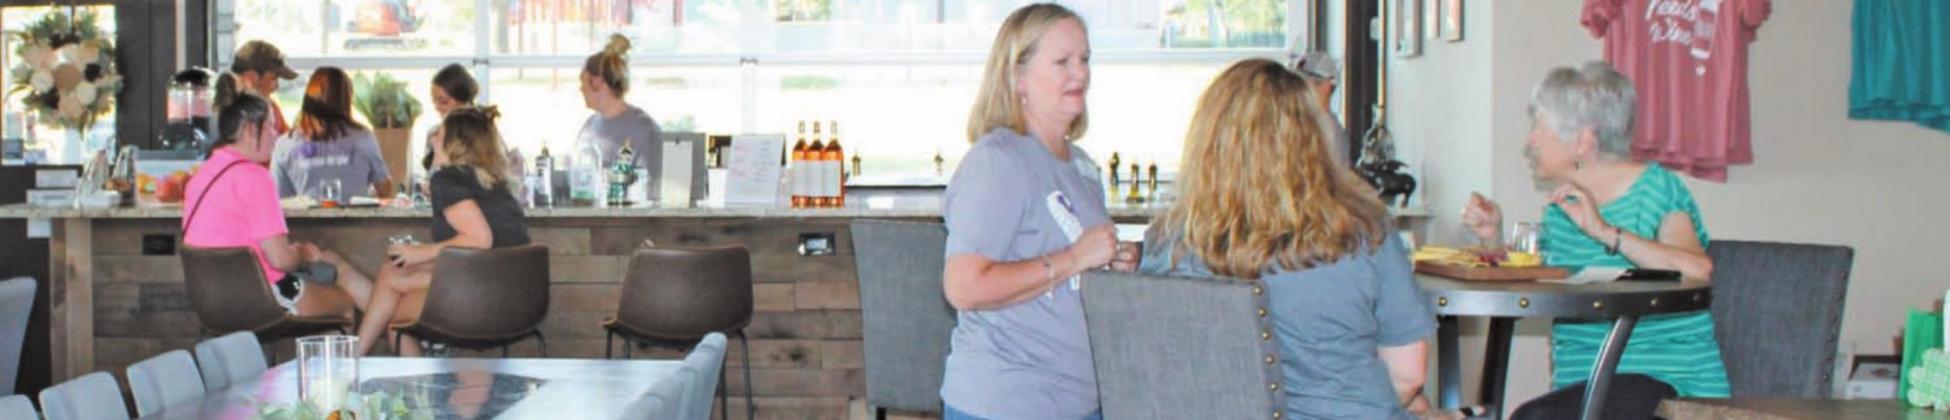 A ‘Walk the Talk’ fundraiser was held Friday night at Lucky Vines to benefit the Cross Timbers Family Services and its efforts of providing hope, help and healing for victims of violent crime. For more information, visit crosstimbershelps.org. Sara Gann | Citizen staff photo